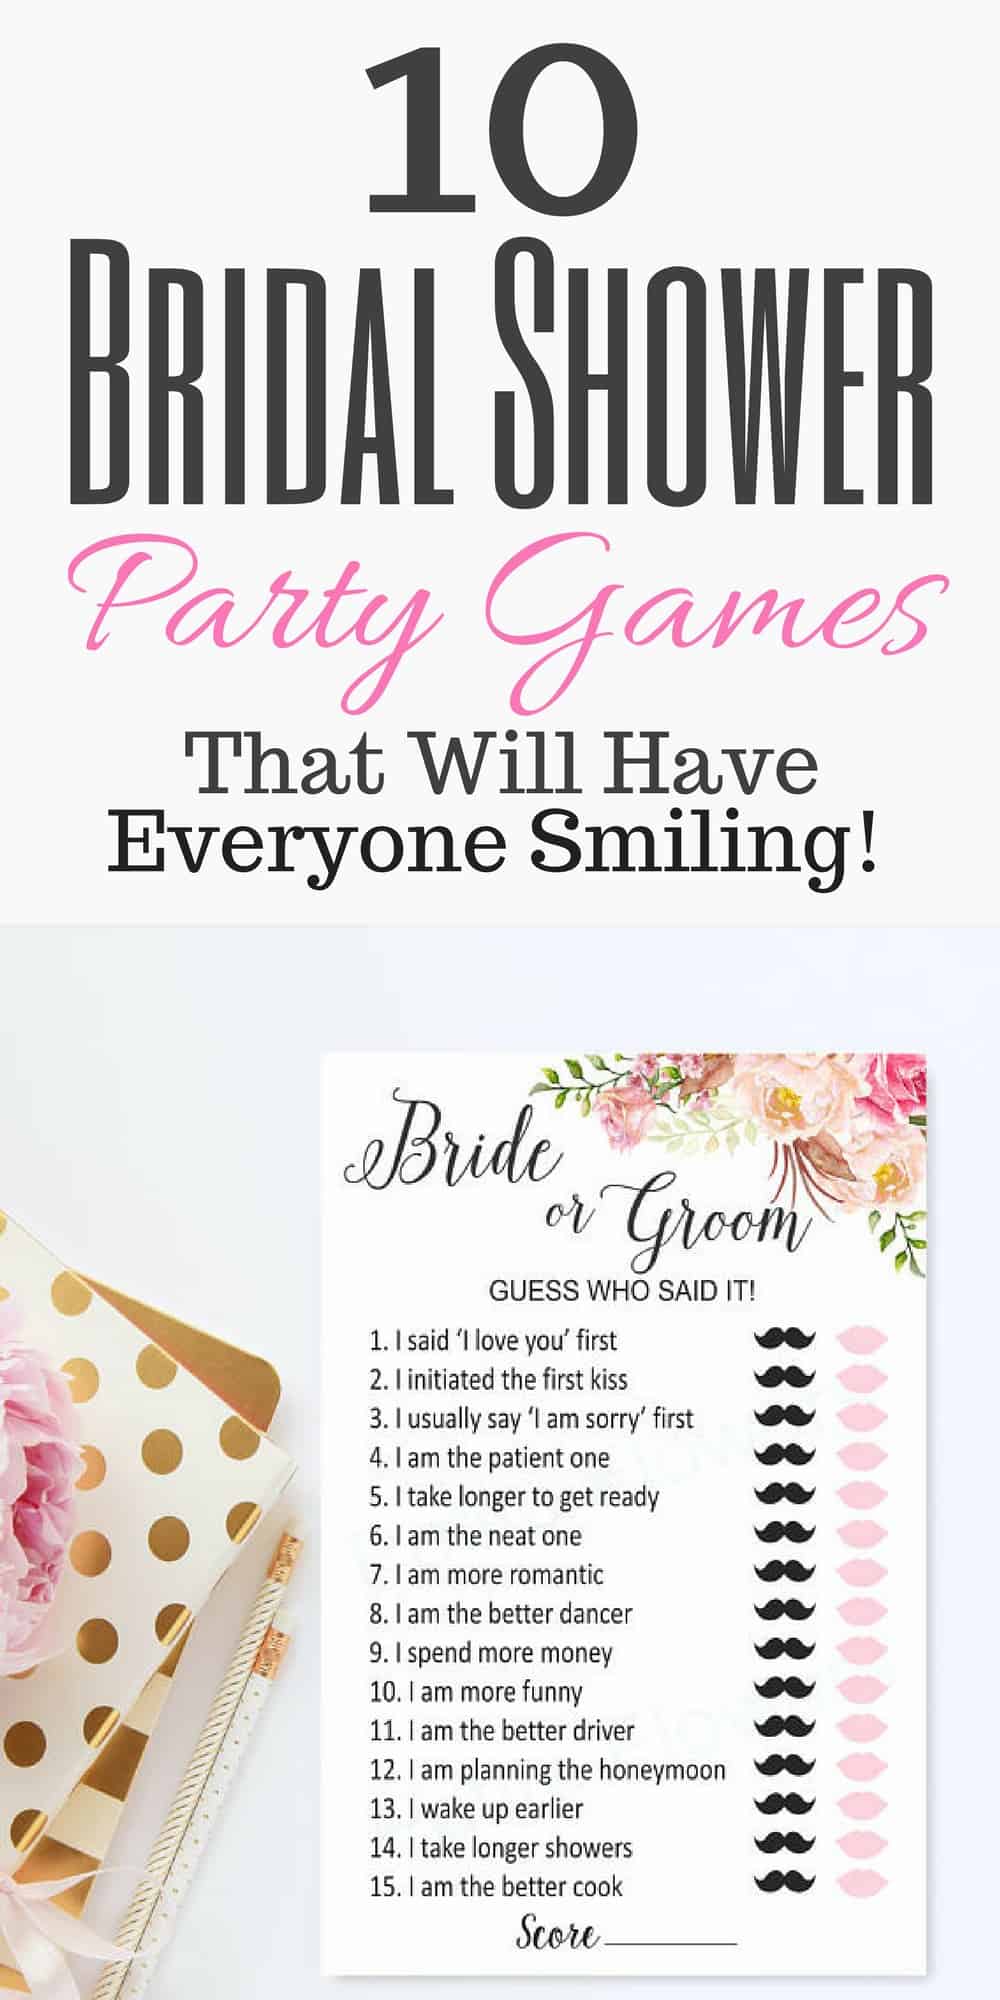 11-bridal-shower-party-games-that-everyone-can-play